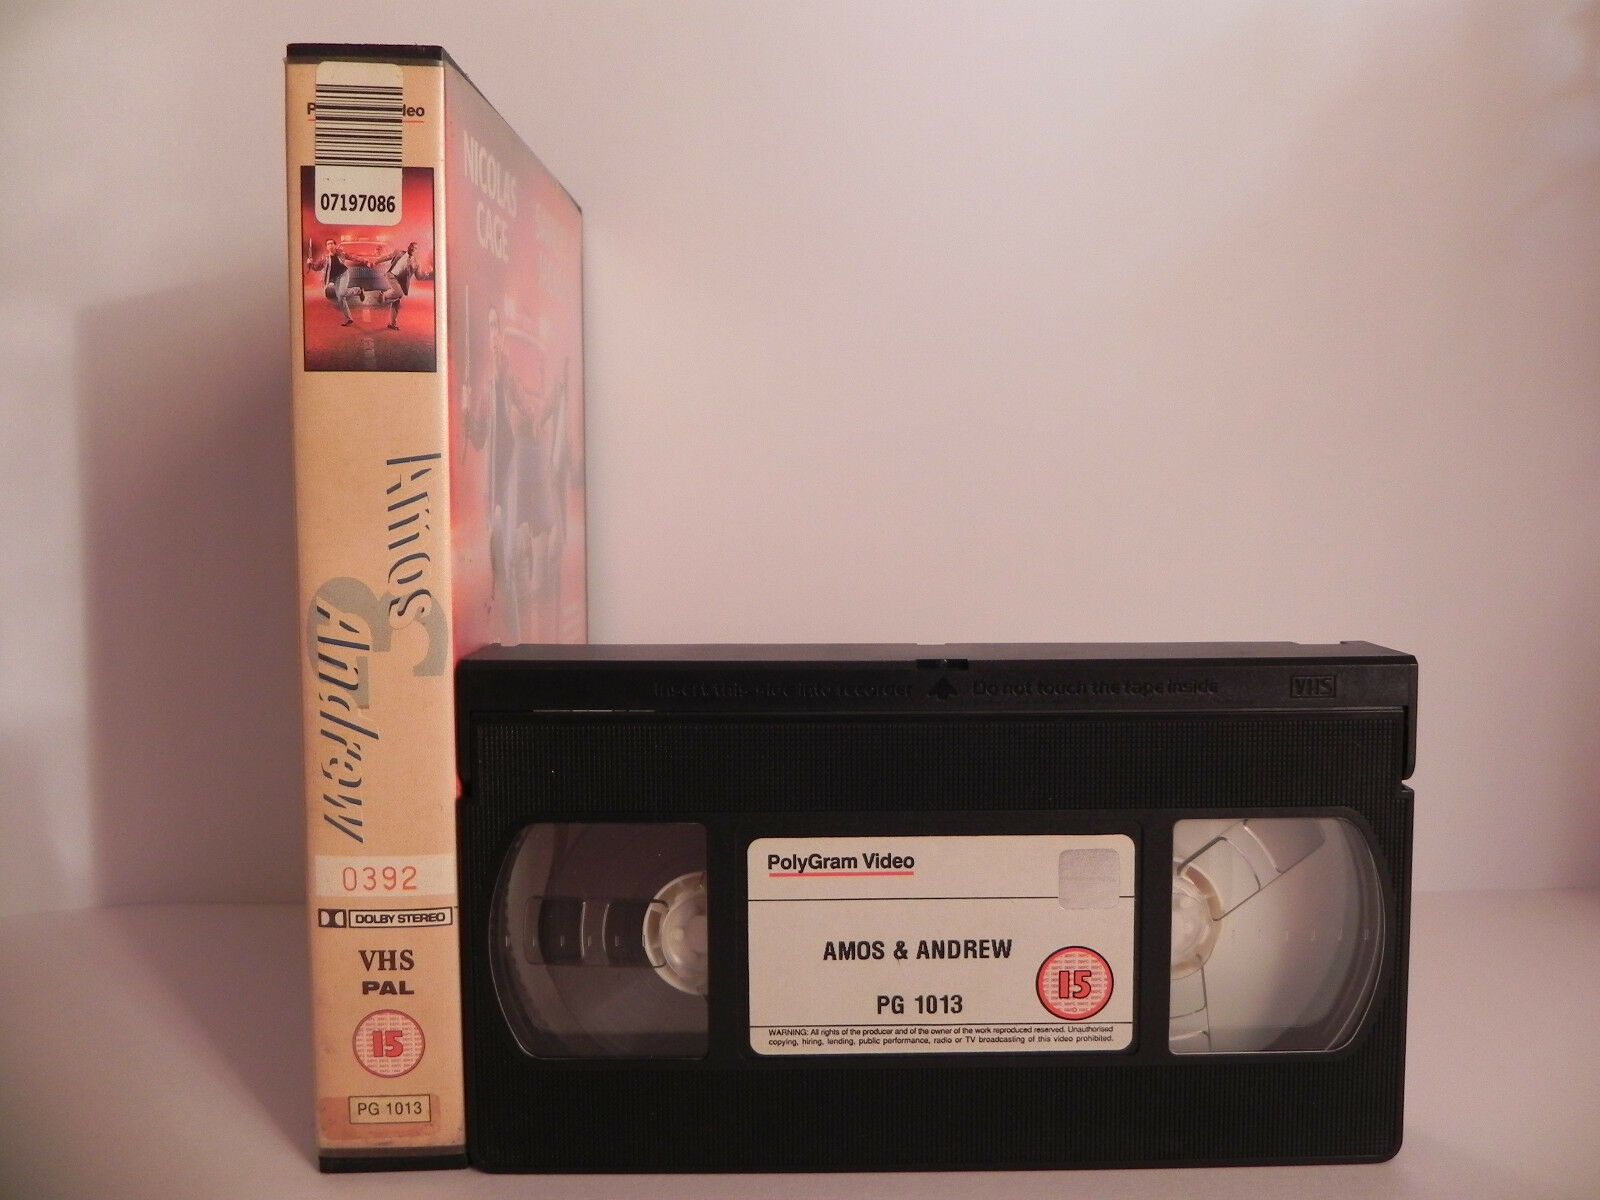 Amos And Andrew - Nick Cage/S.L.Jackson - Big Box - Ex-Rental - X-Funny - VHS-